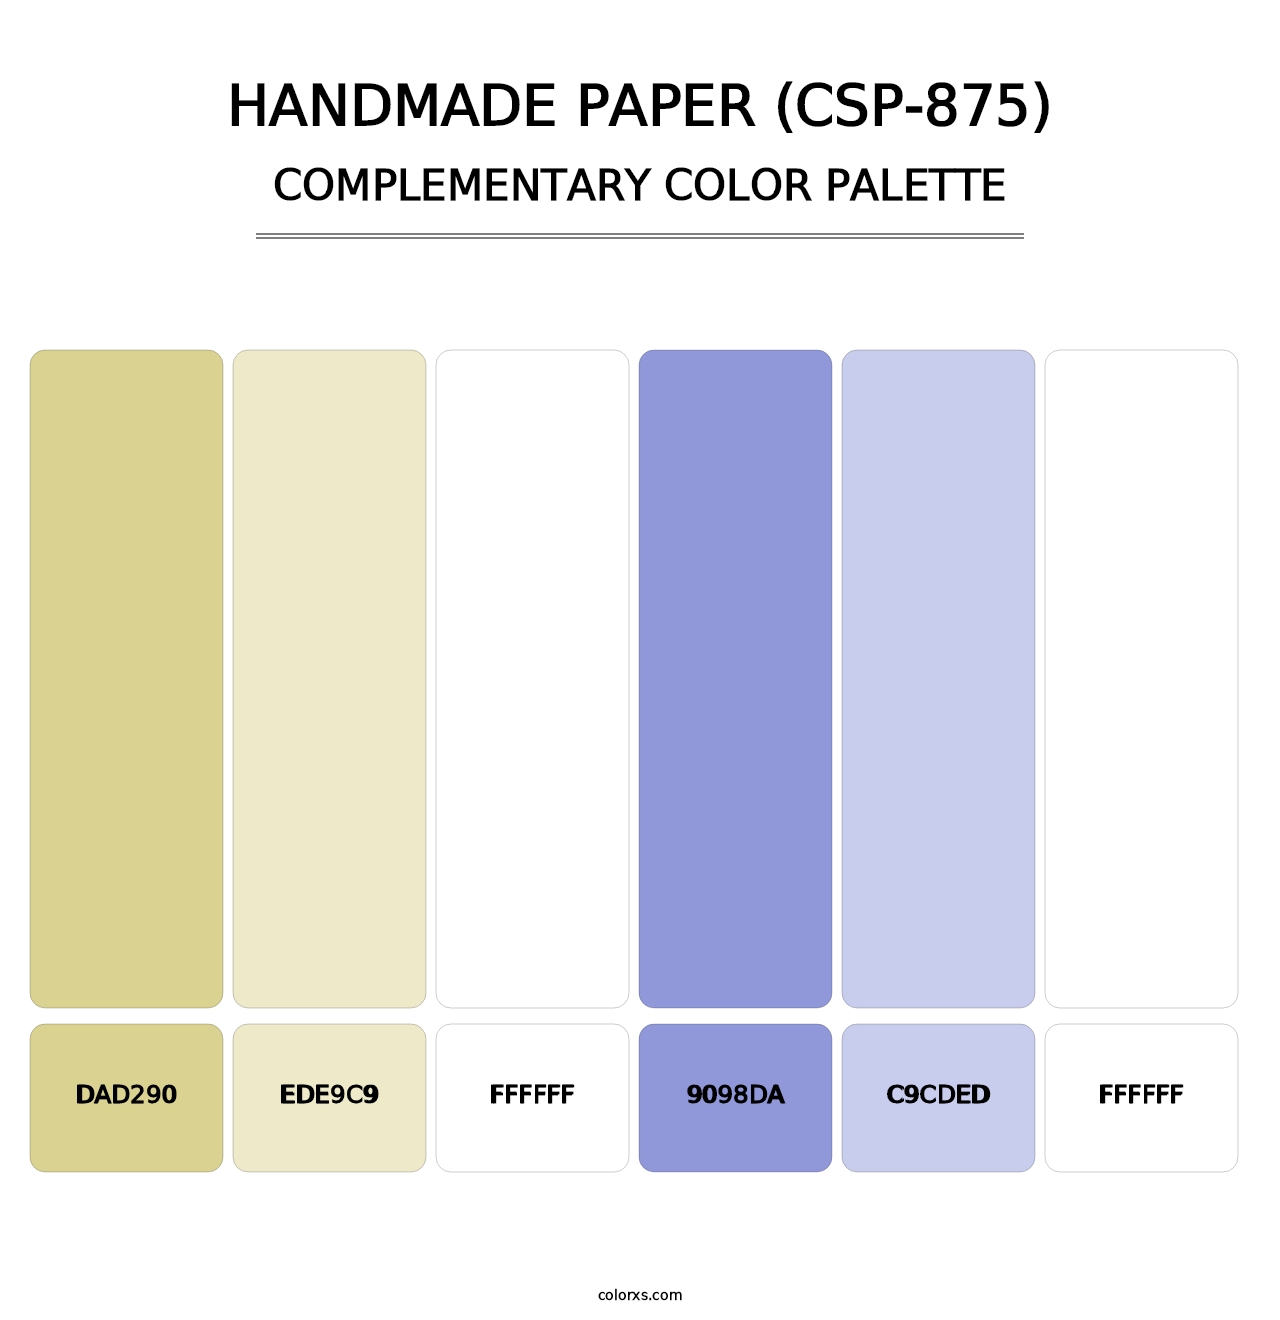 Handmade Paper (CSP-875) - Complementary Color Palette